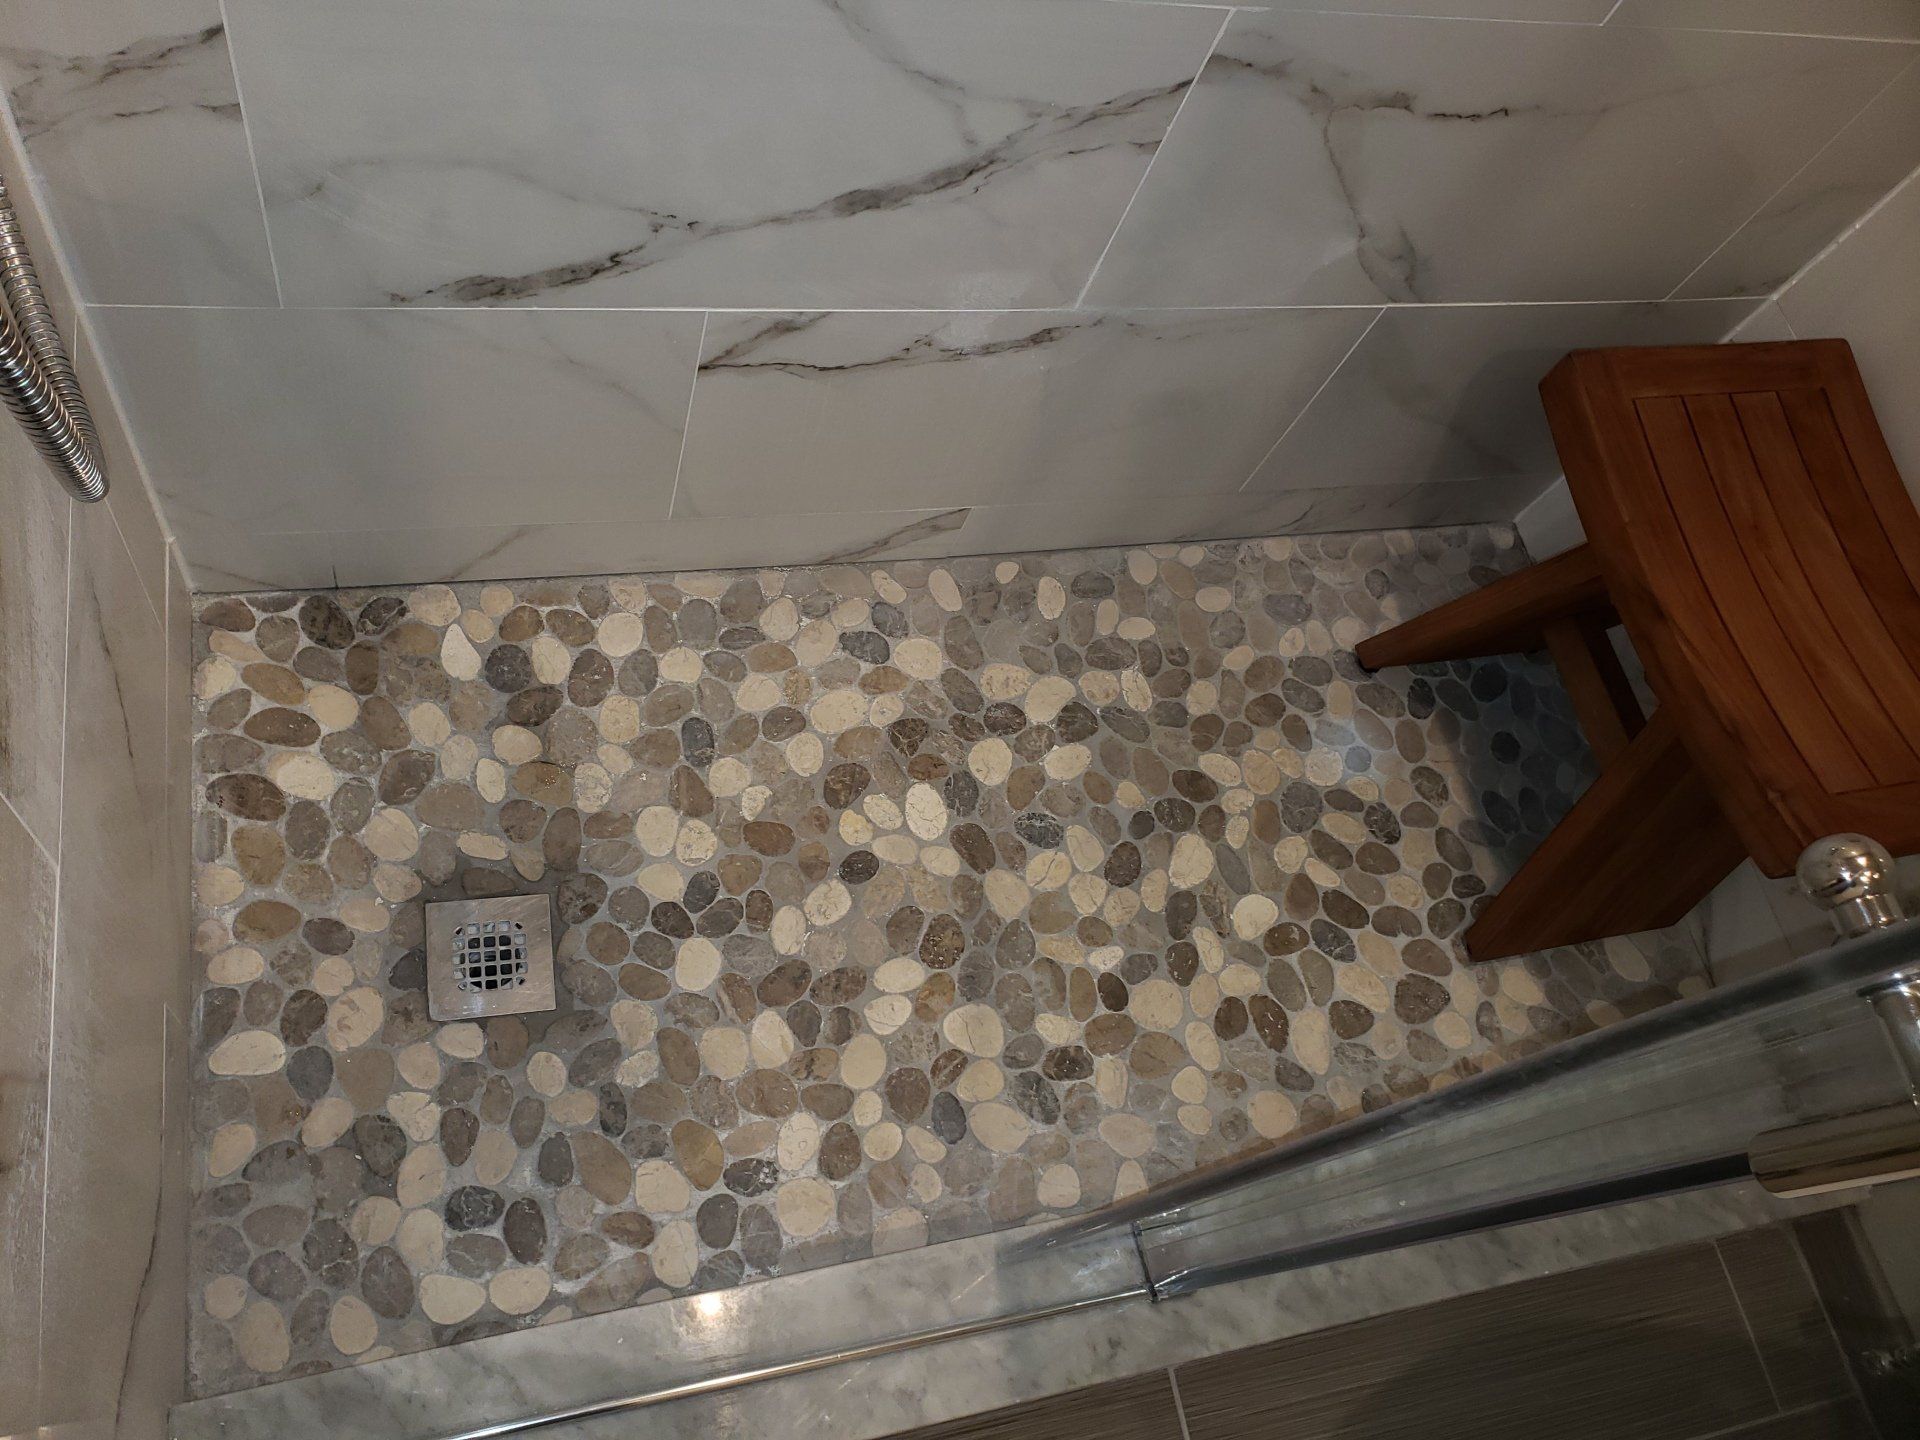 Pebble shower floor, witha wooden bench and marble shower tile in Jenkintown bathroom remodel